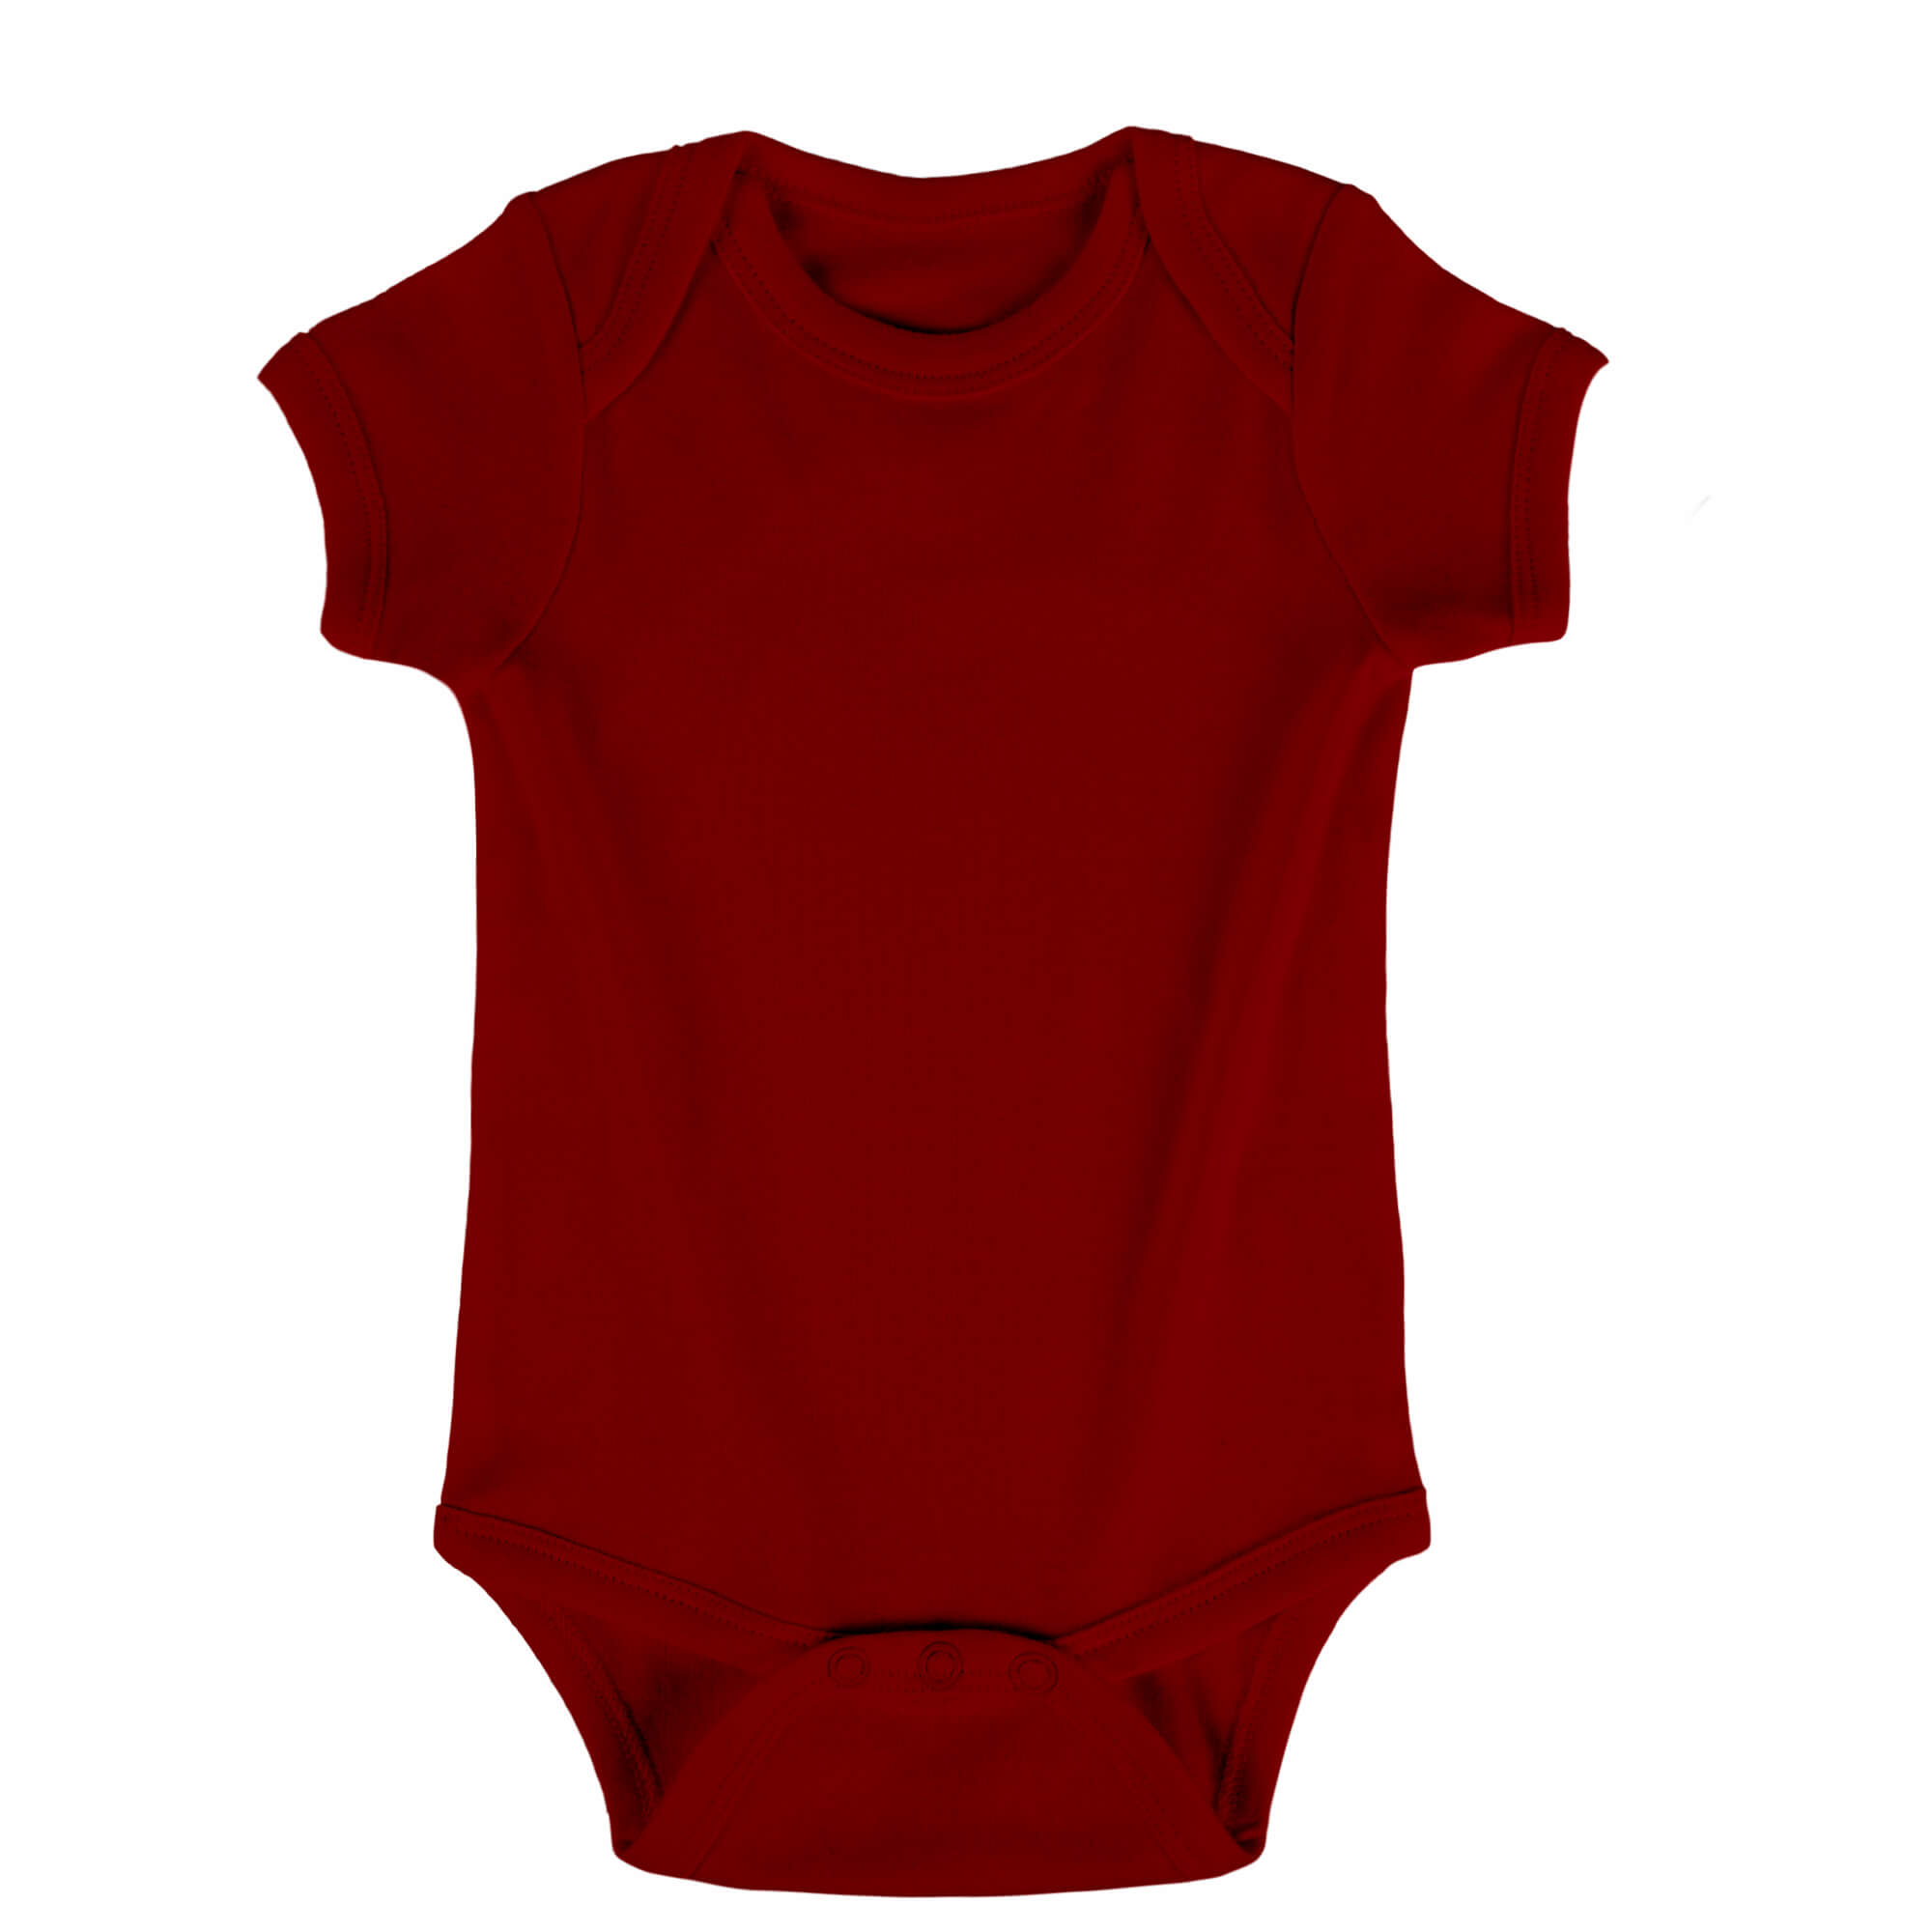 dark red color number #6, onesie color selection, and color display.